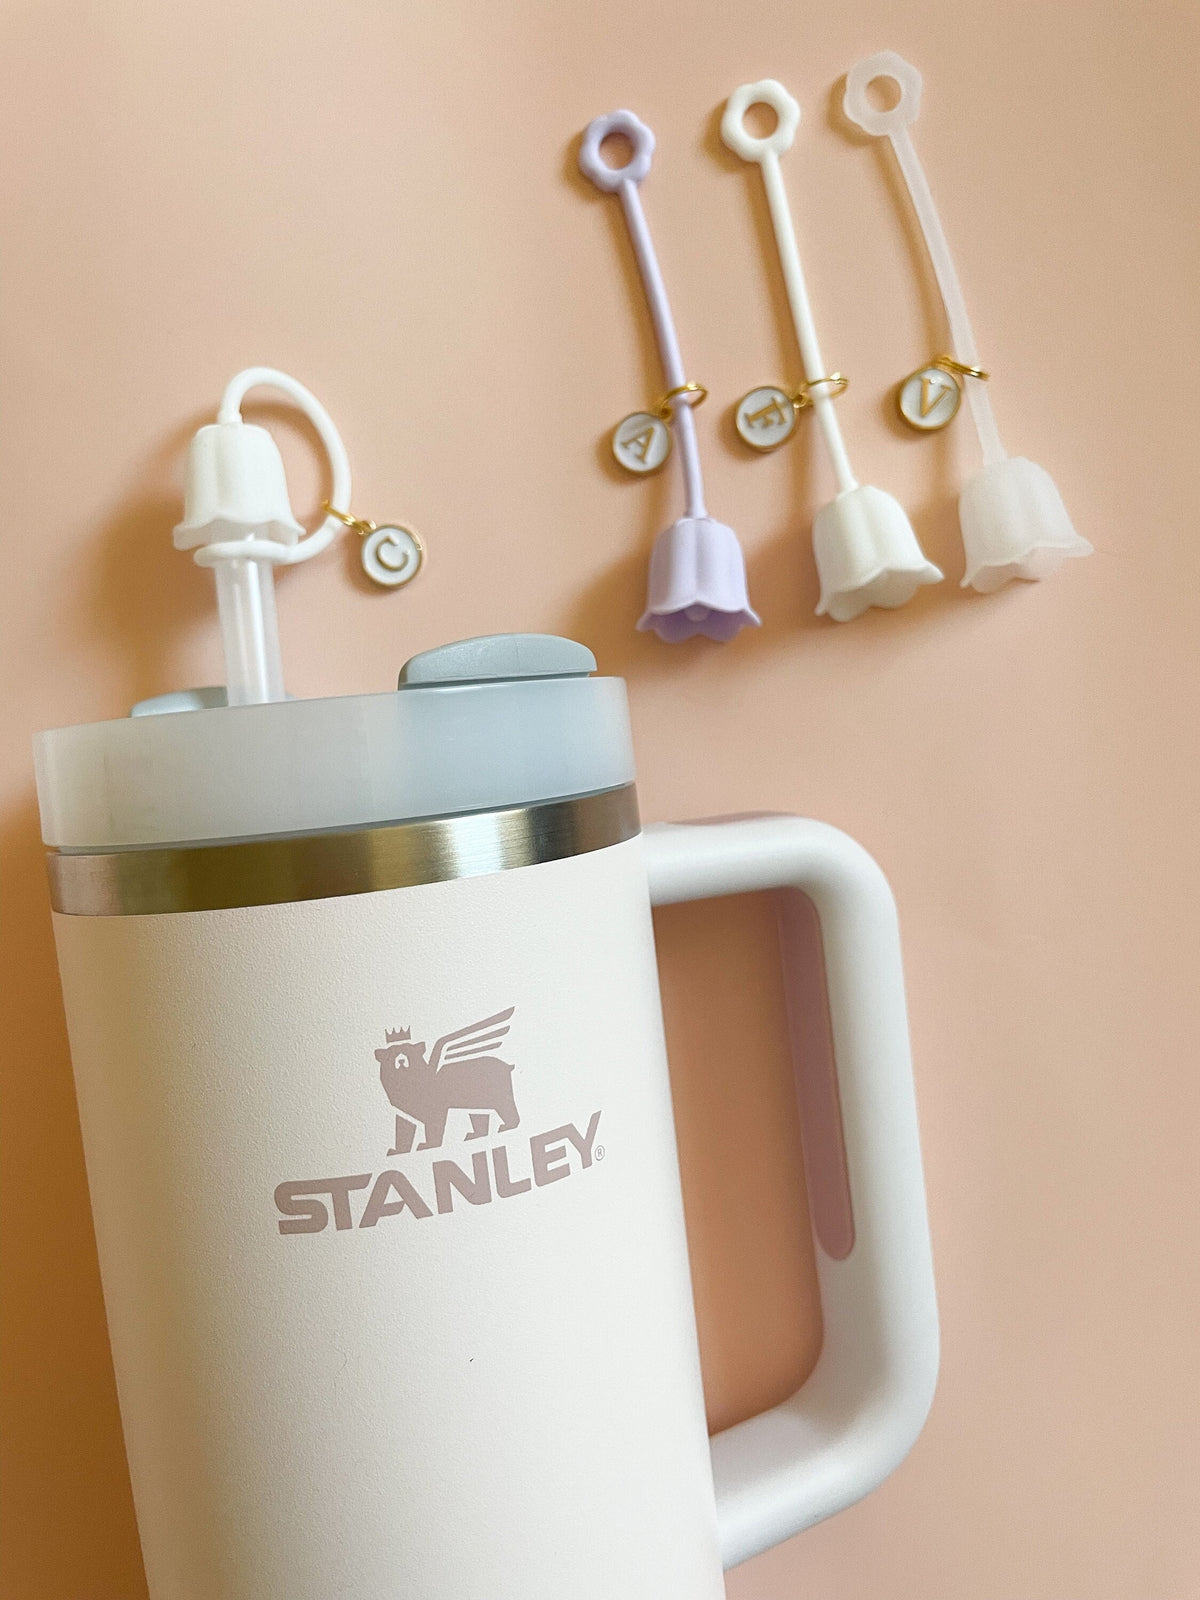 Stanley Tumbler Charm Stanley Accessory Water Bottle Charm Cup Charm  Stanley Cup Charm Tumbler Handle Charm Drink Accessory Best Friend Gift 